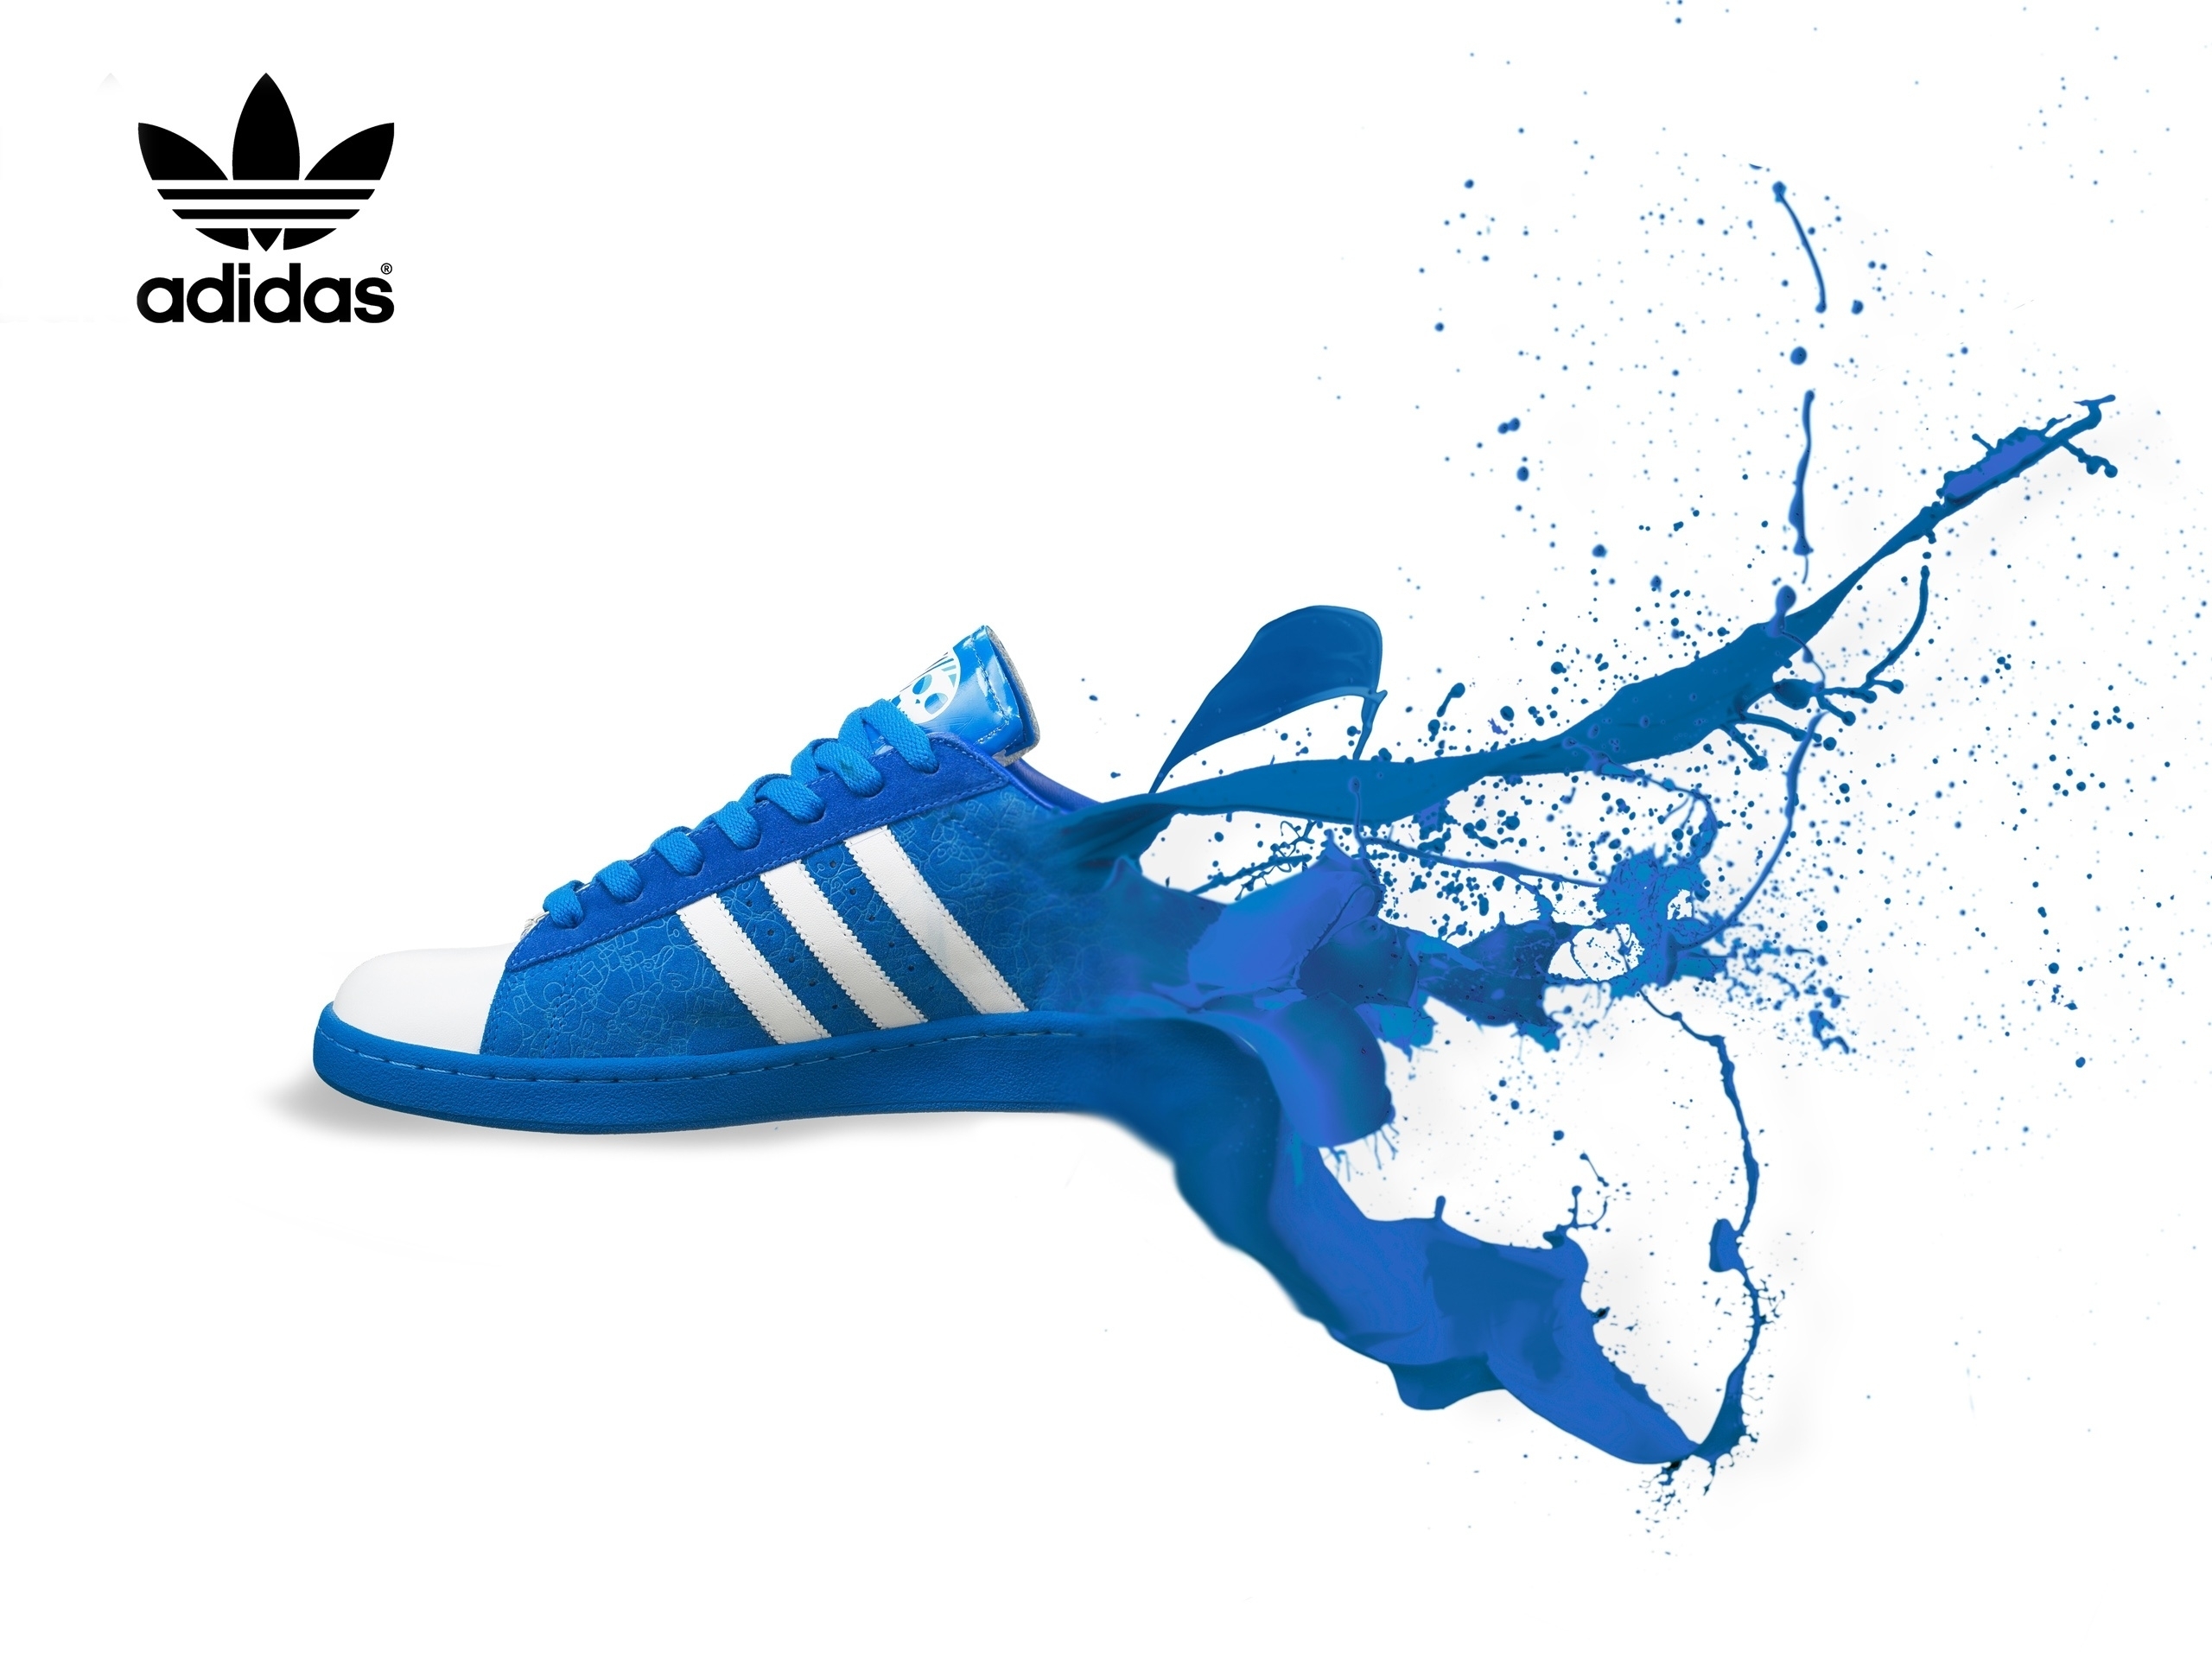 products, adidas